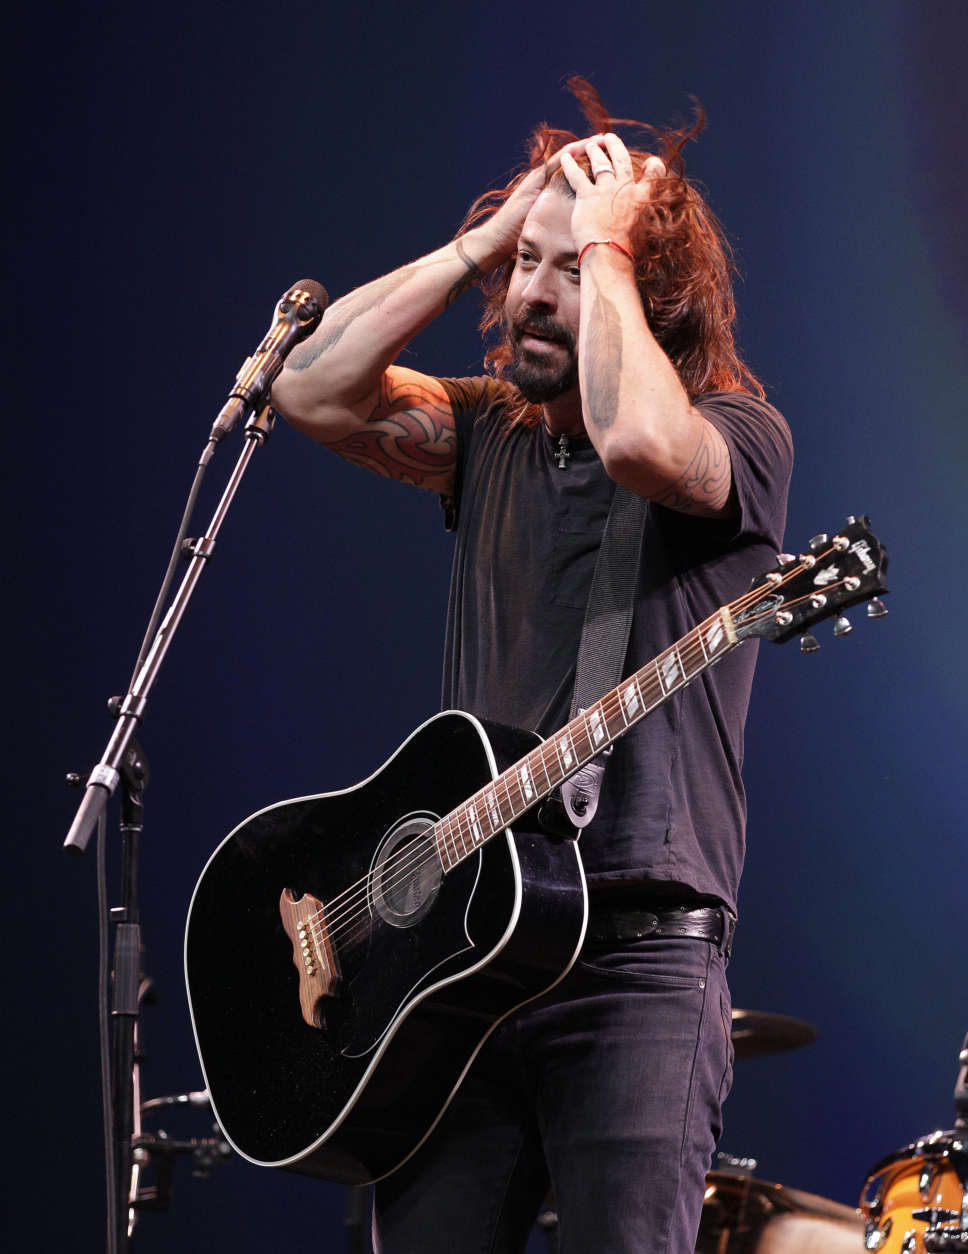 Dave Grohl, lead of the Foo Fighters band on stage following the introduction of new Apple products including the iPhone 5 in San Francisco, Wednesday, Sept. 12, 2012.  (AP Photo/Eric Risberg)